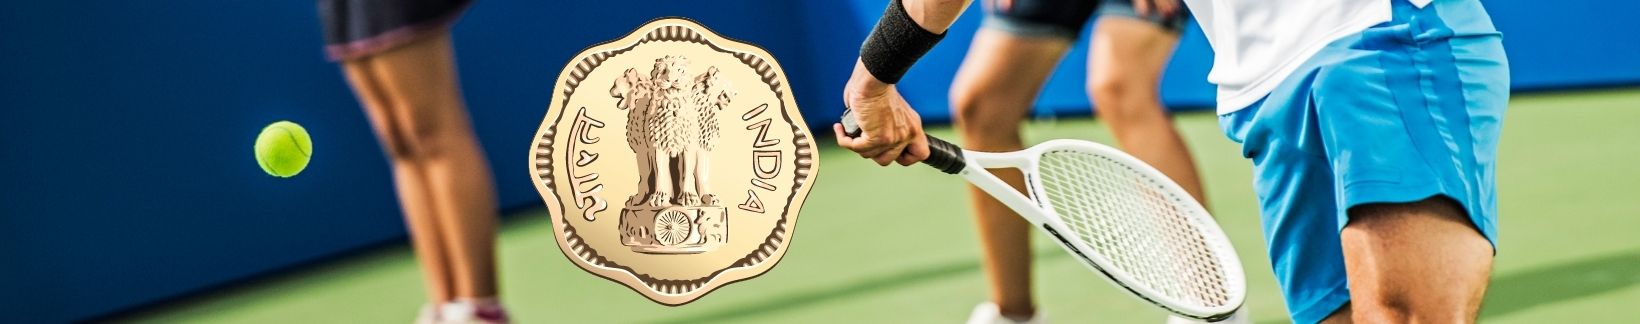 Tennis betting tips and predictions for free